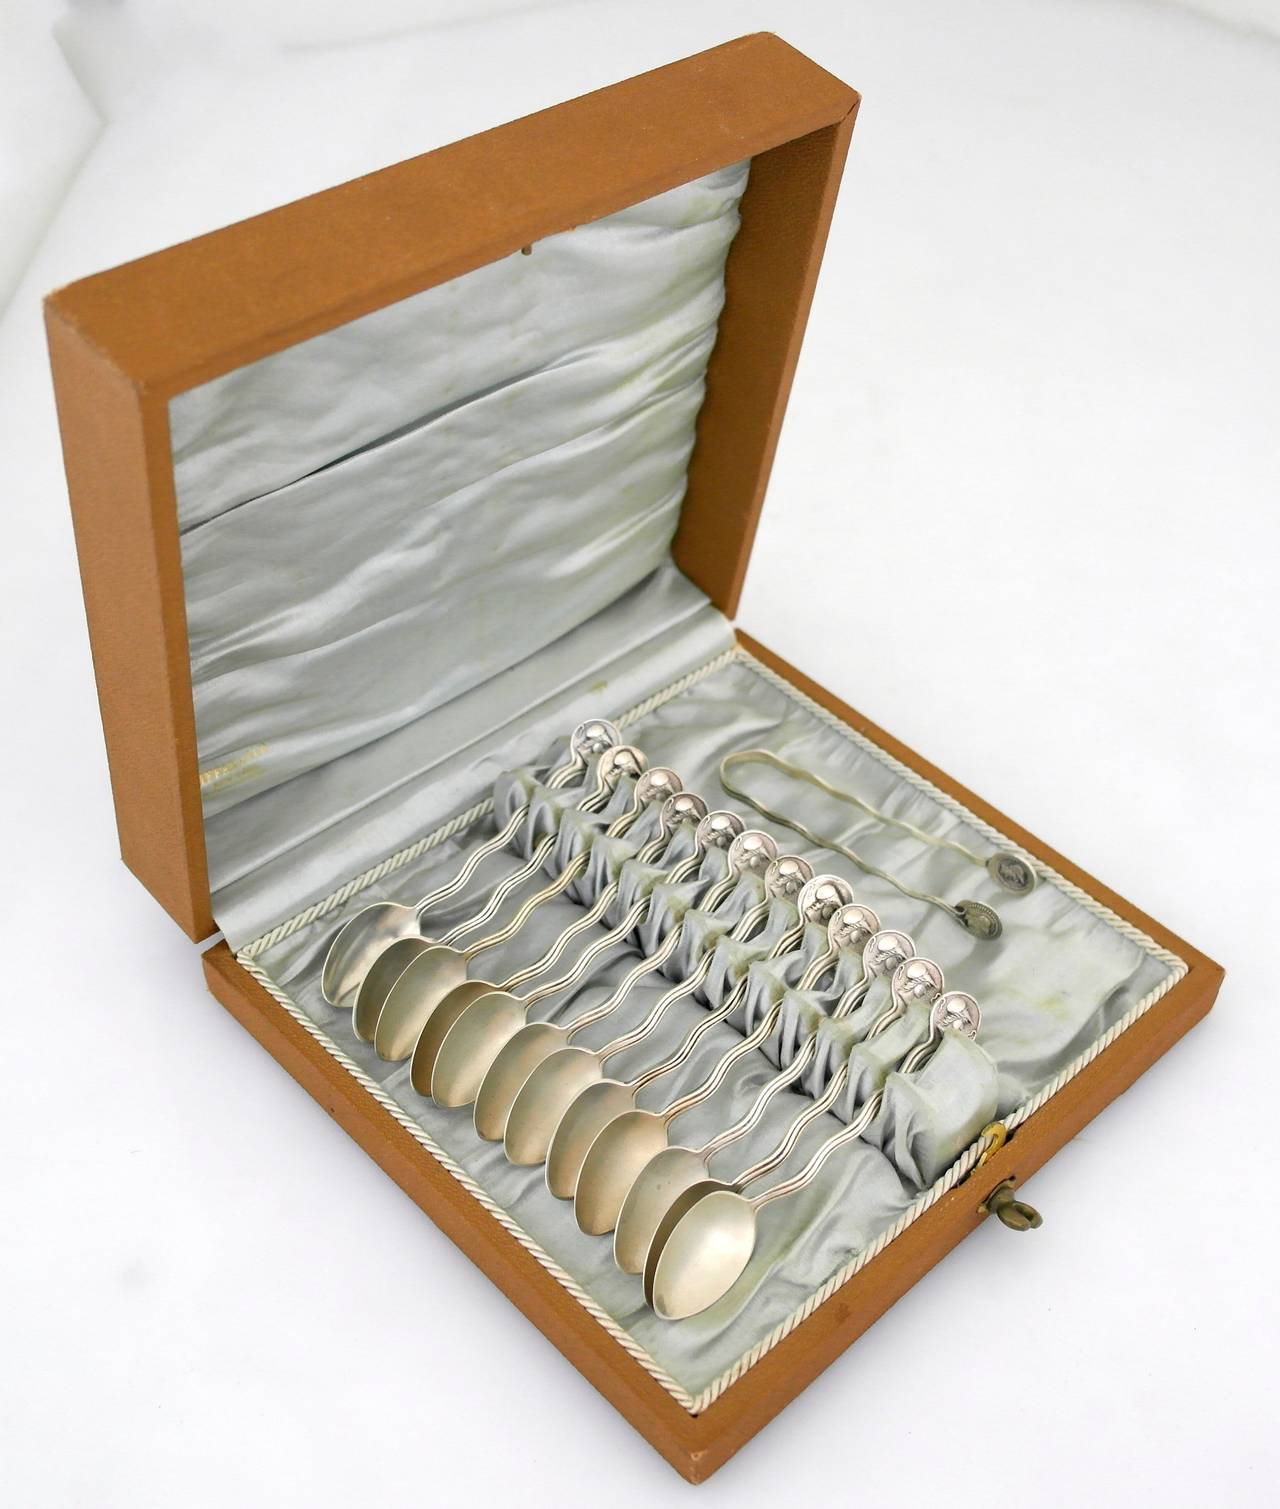 Gorham Medallion Coin Silver Demitasse Set with 12 Spoons and Sugar Tongs For Sale 2